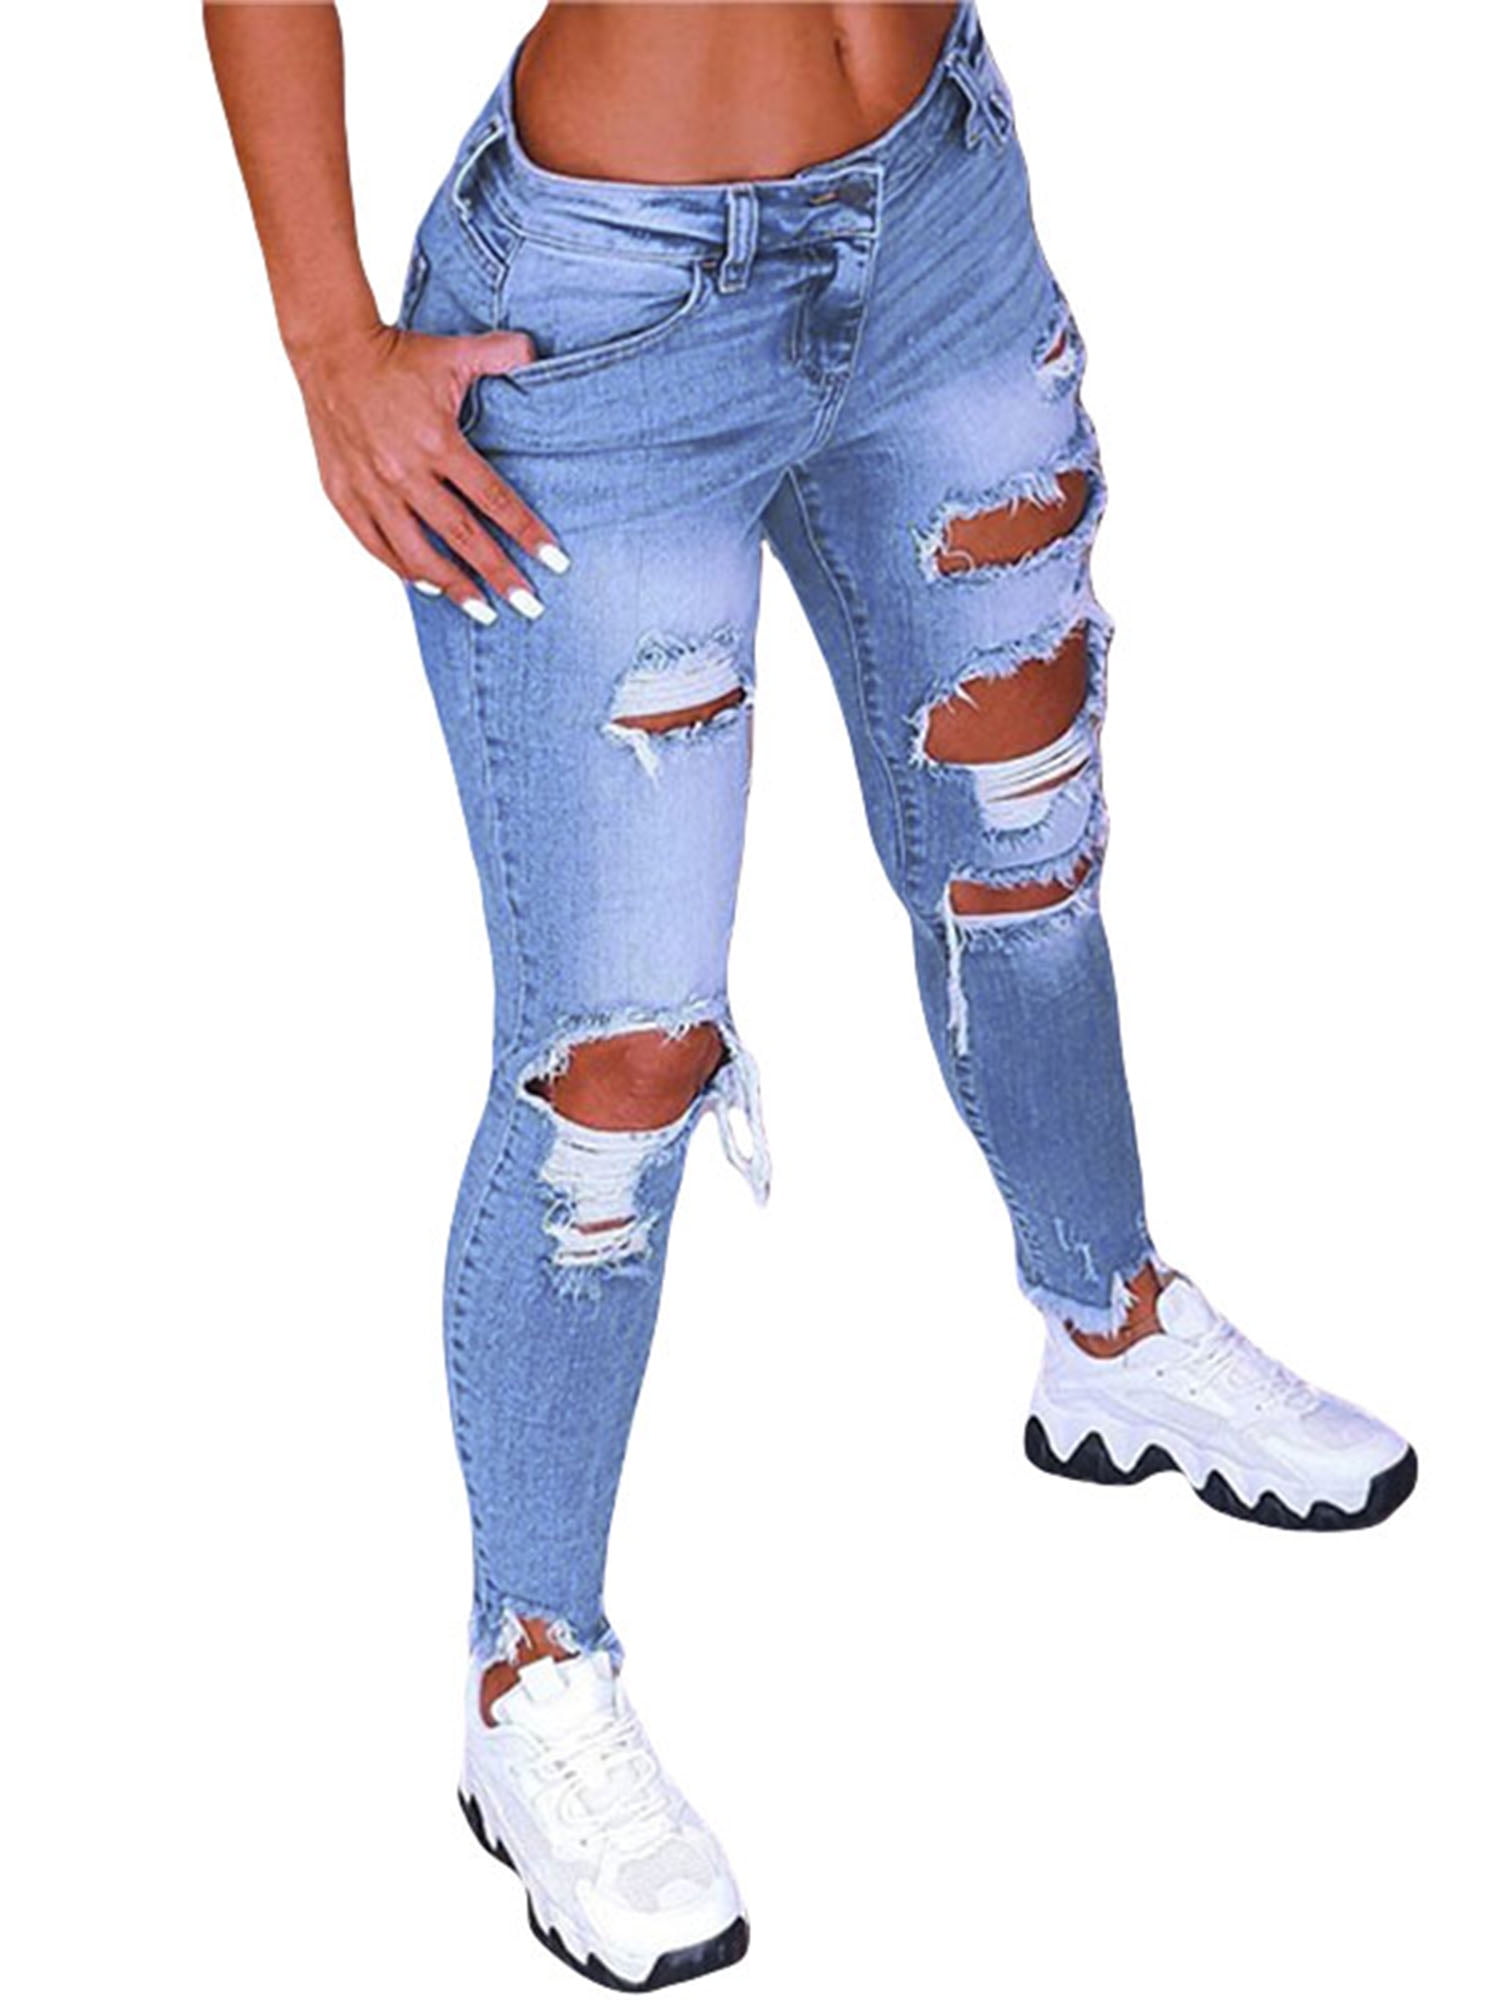 Women's High Waist Washed Frayed Ripped Holes Skinny Jeans Casual Stretch Slim Denim Trousers xoxing Jeans for Women B